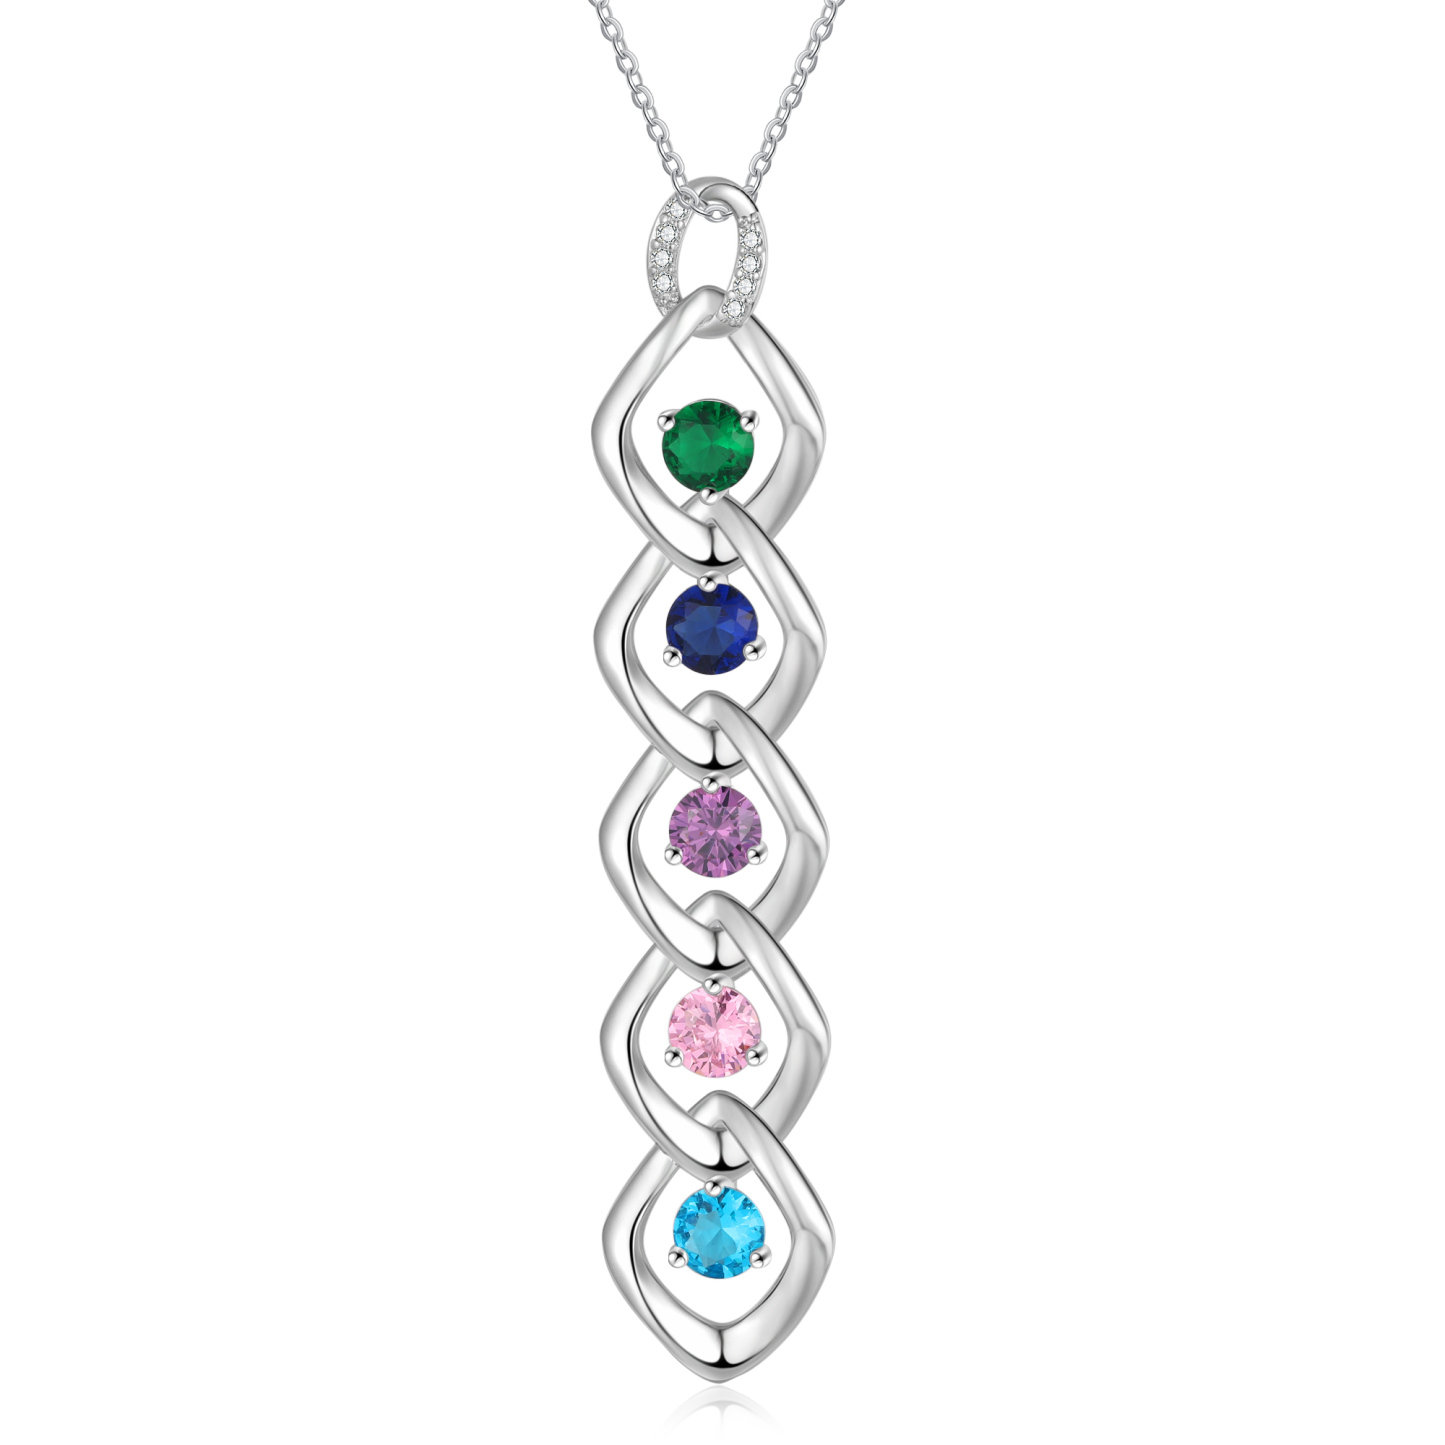 5 Names - Personalized Birthstone Necklace With Name Engraved For A Special Gift For Mom/Grandma